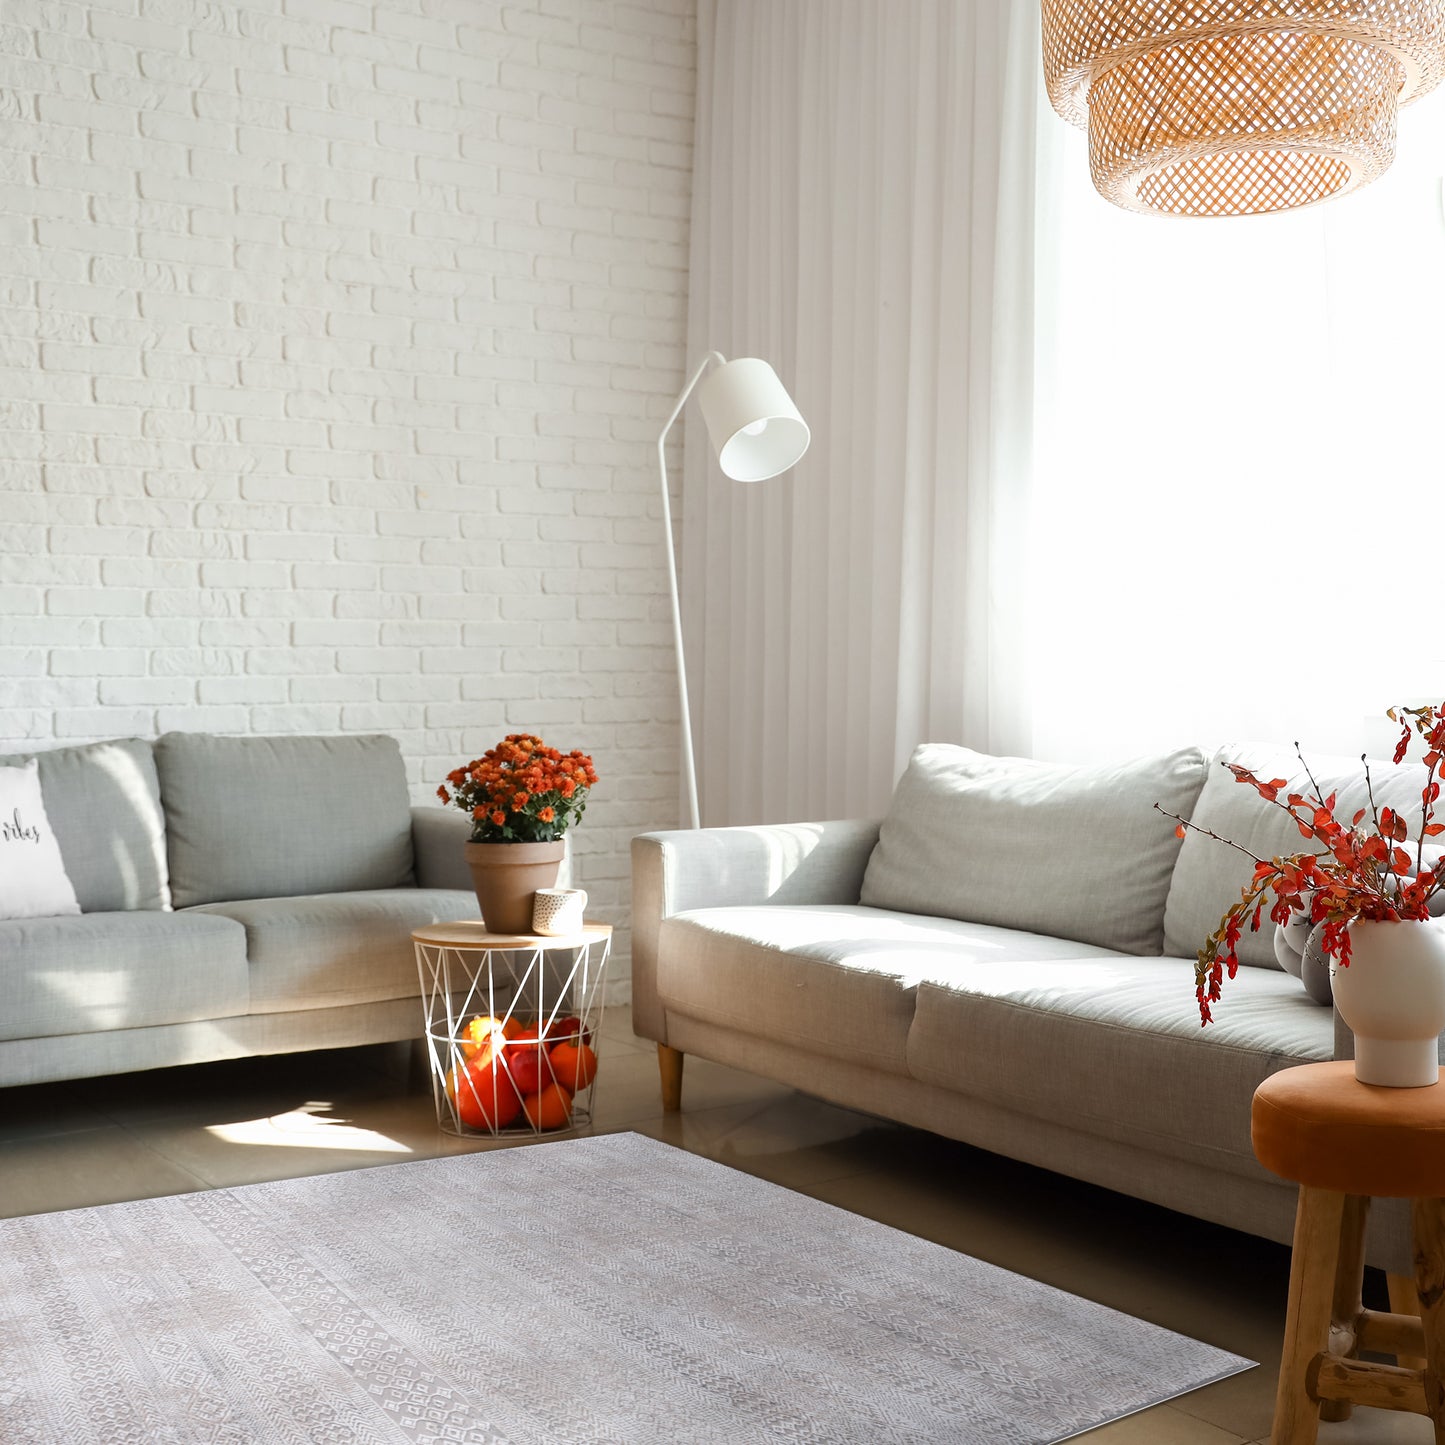 Bright modern family room with grey sofas, white and rattan lamps, warm accents and autumn plants